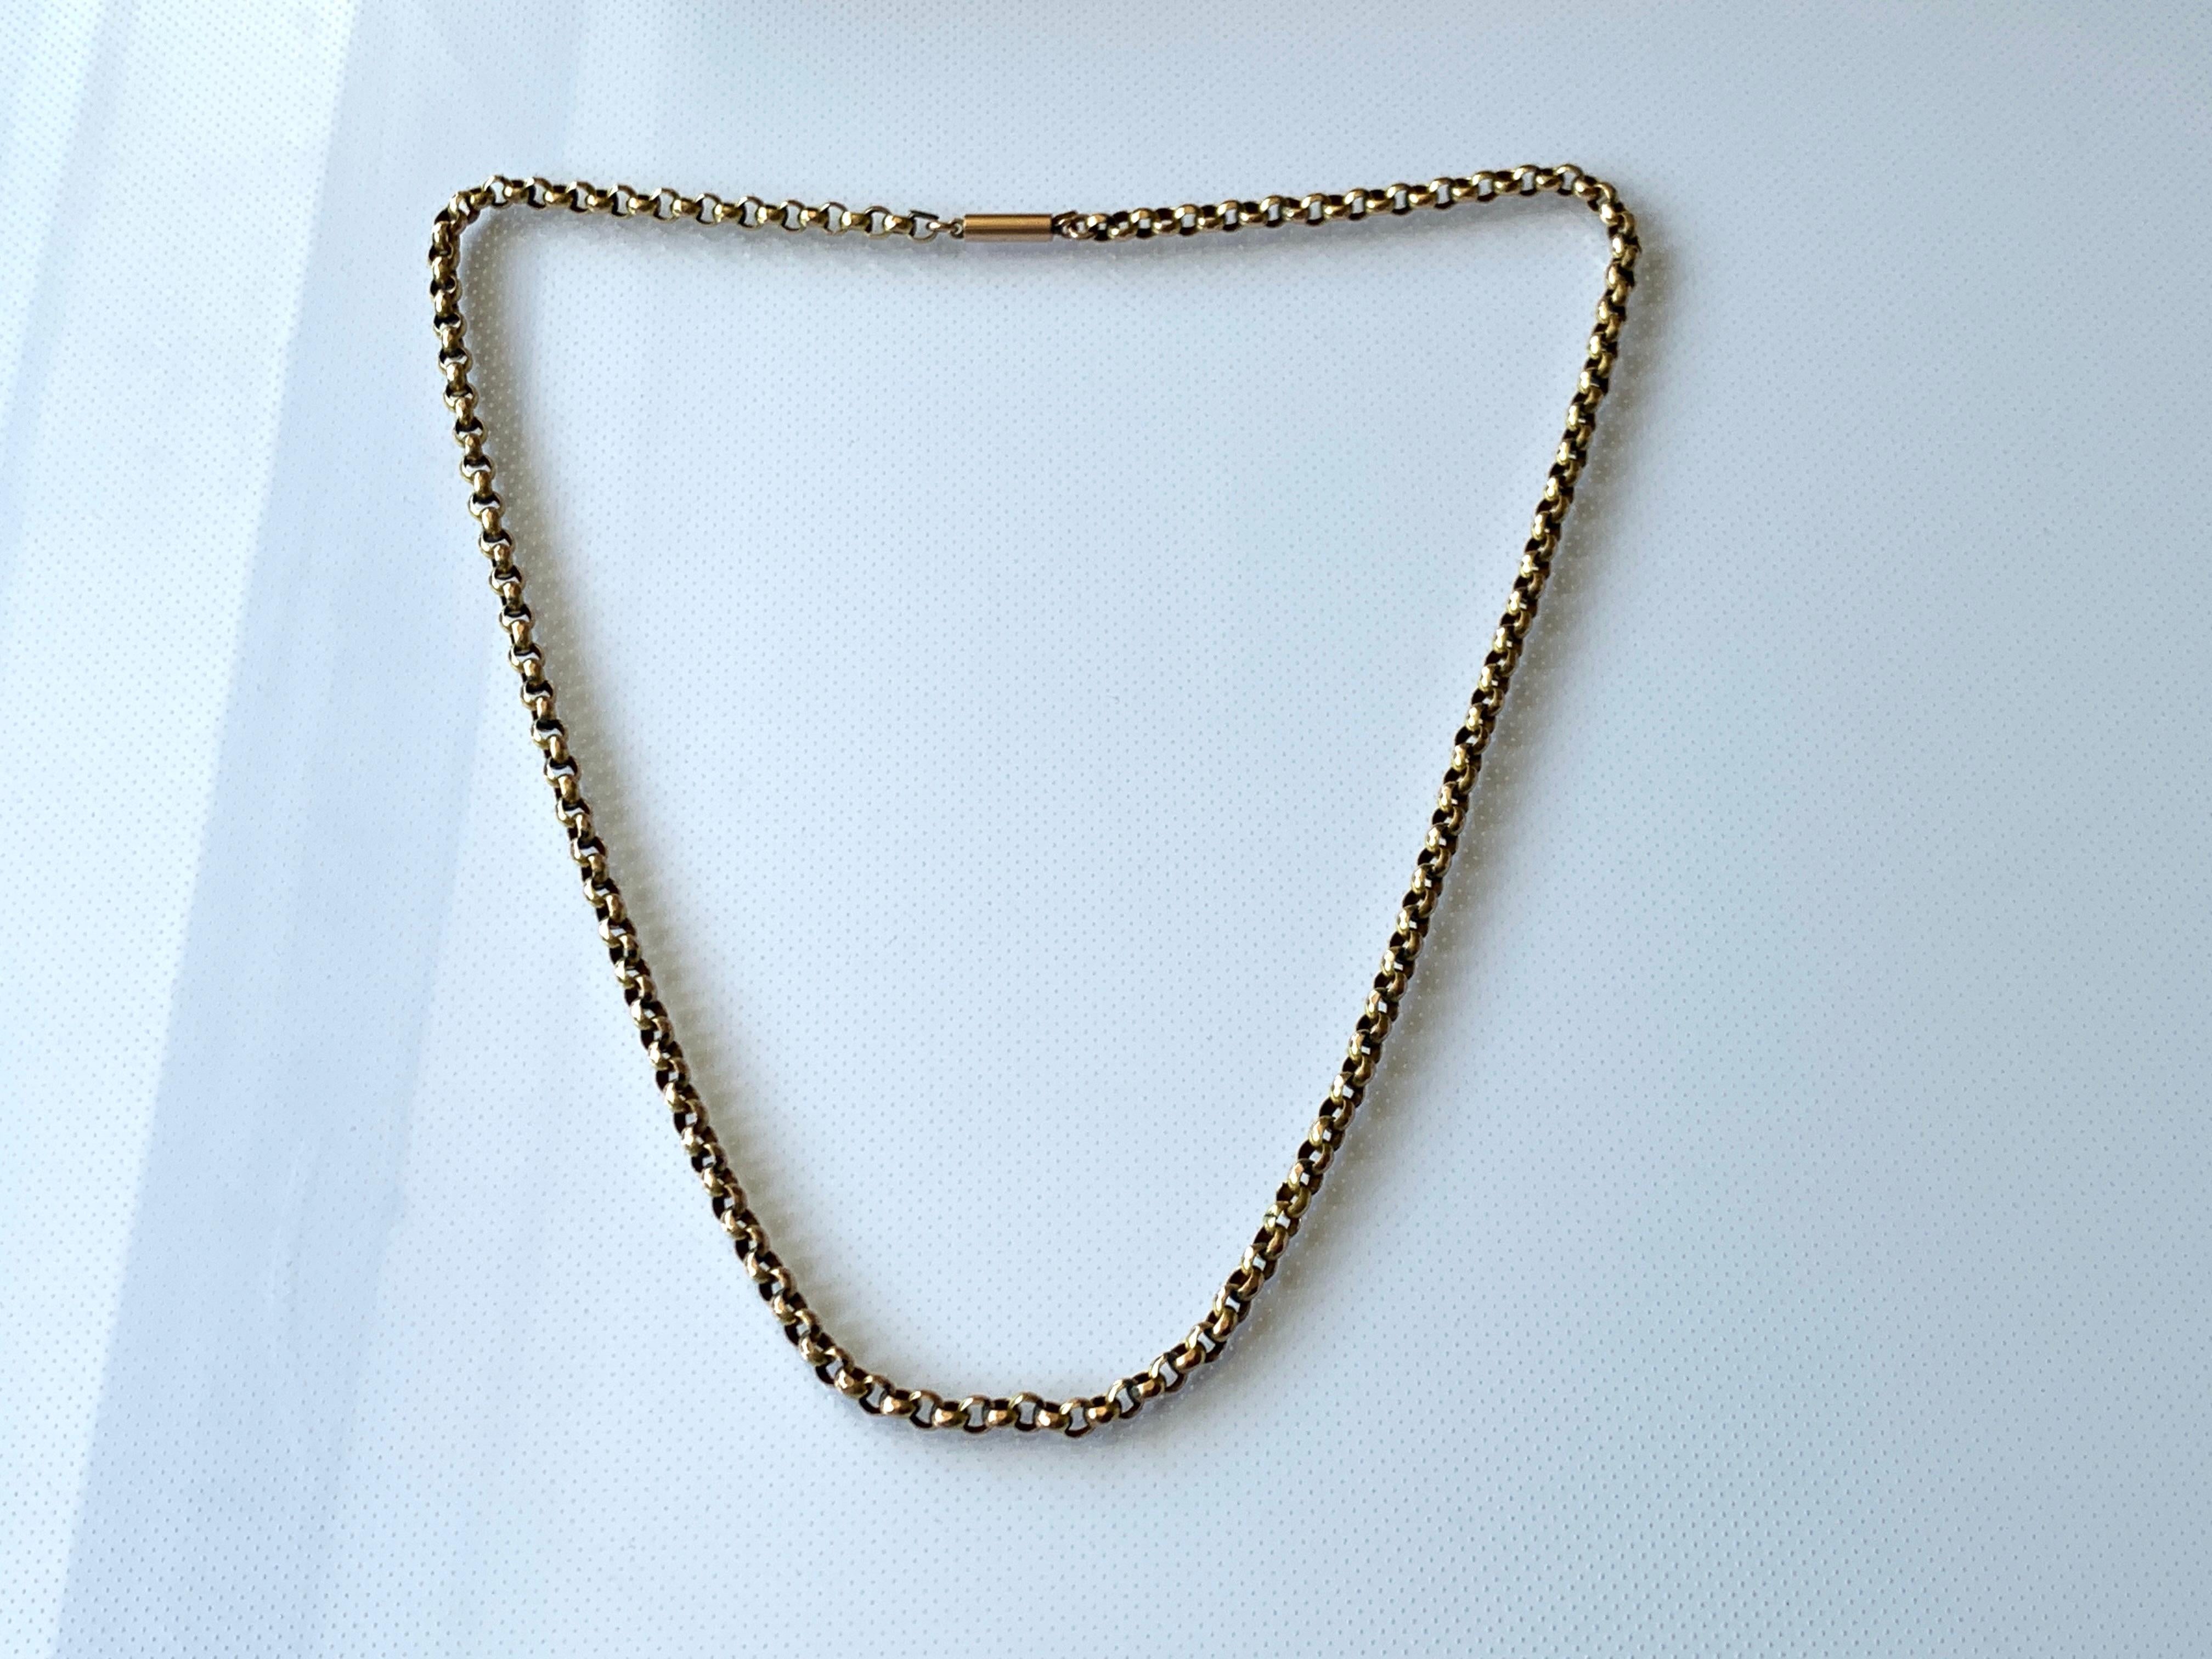 9ct Gold Victorian Chain 
with barrel clasp 
and a 9c plaque attached 
Barrel clasp is secure & tight .
In lovely condition with Rose gold highlights upon the decorative links 
Chain has been handcrafted in  1880s 
18